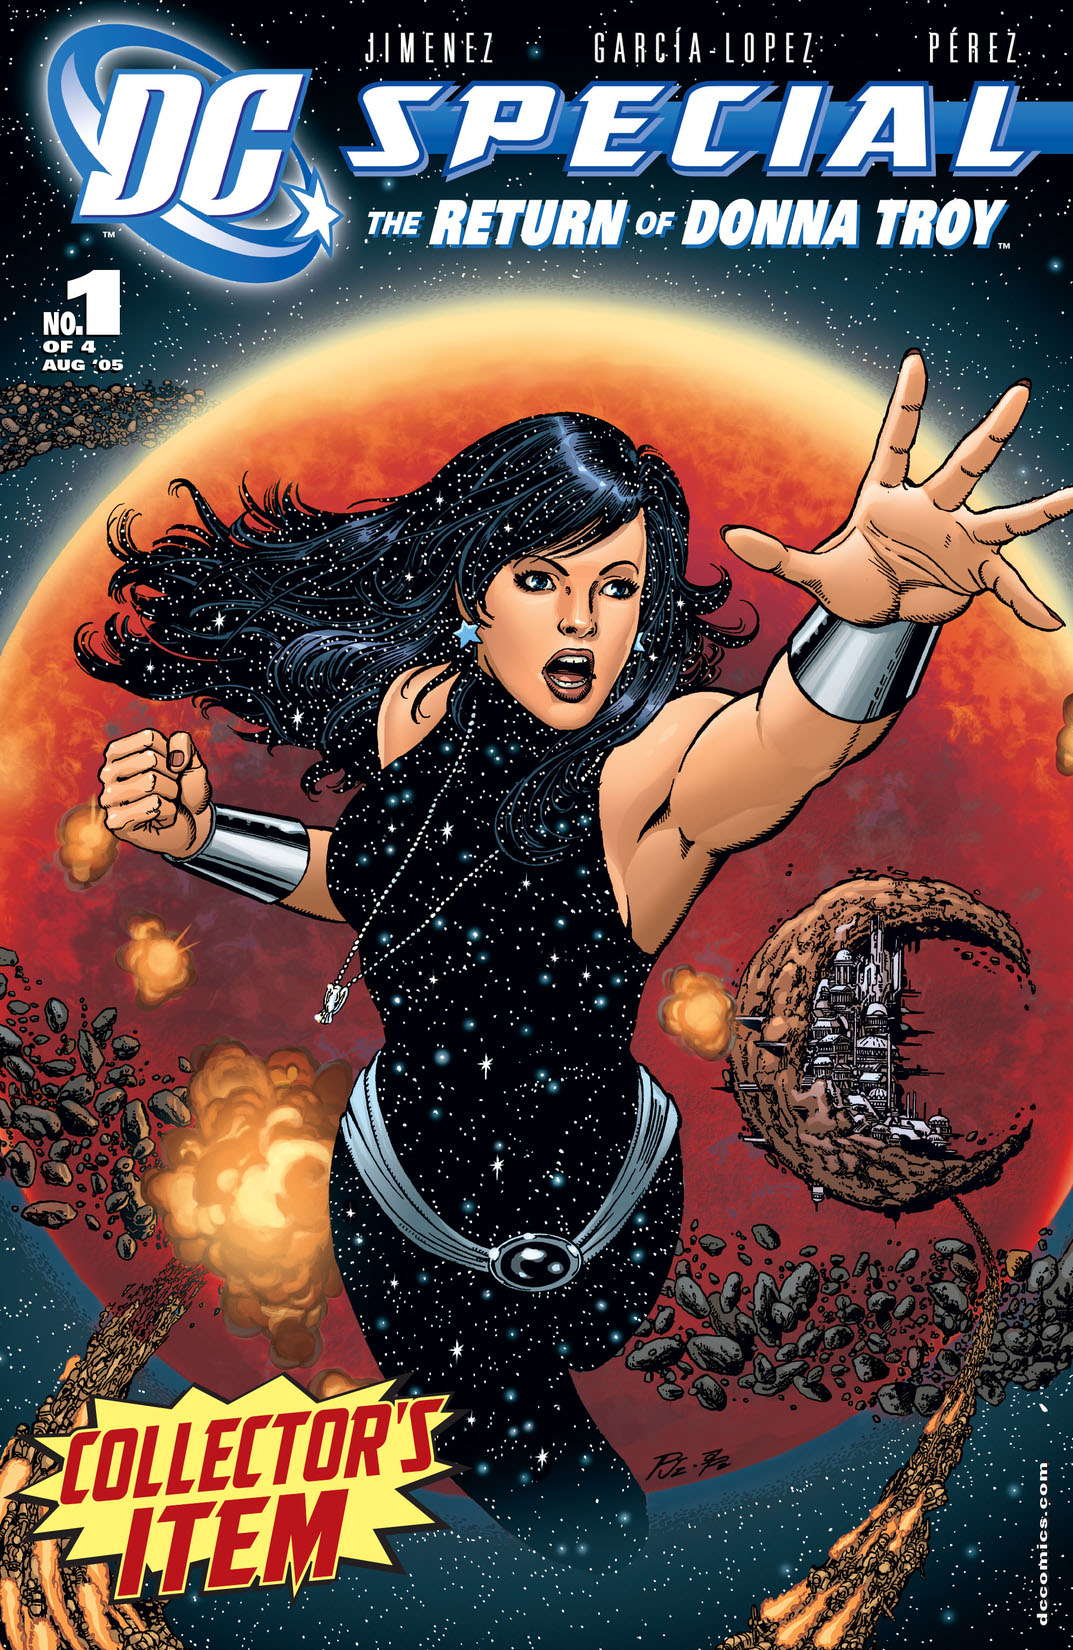 DC Special: The Return of Donna Troy #1 preview images